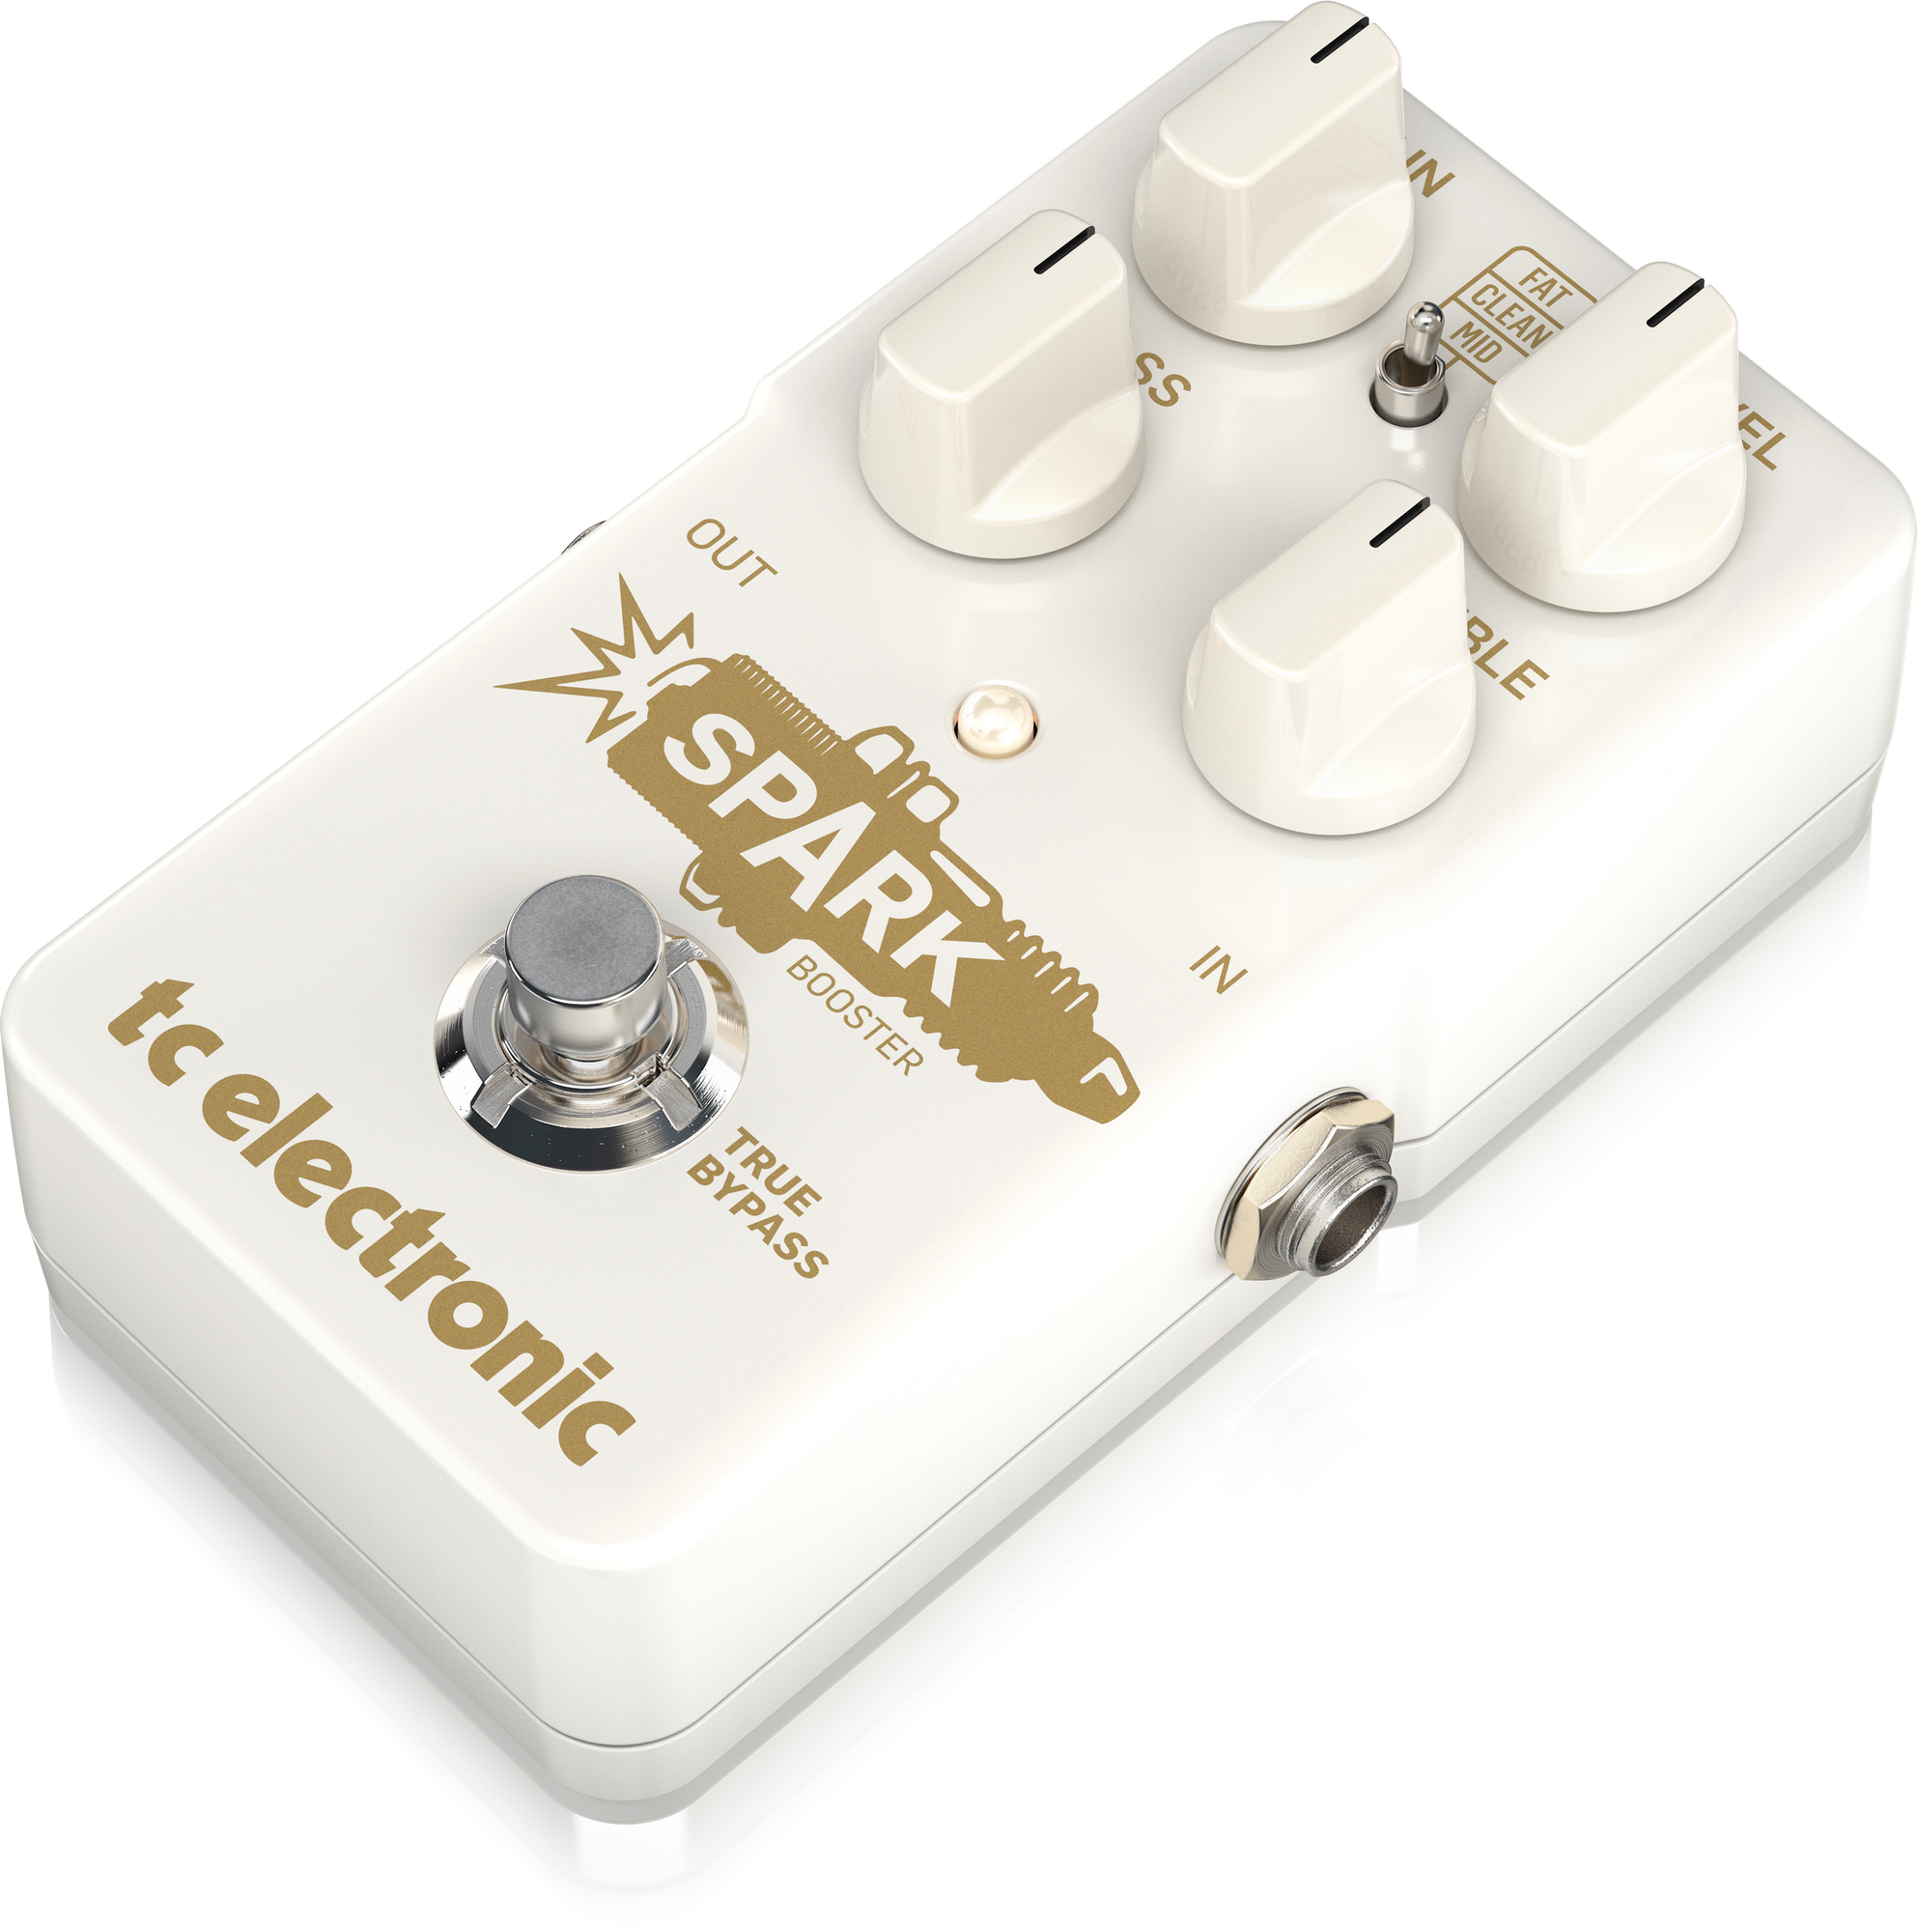 TC Electronic Spark Booster Awesome Booster Pedal With Gain Control And Active EQ, TC ELECTRONIC, EFFECTS, tc-electronic-effects-tc-spark-booster, ZOSO MUSIC SDN BHD